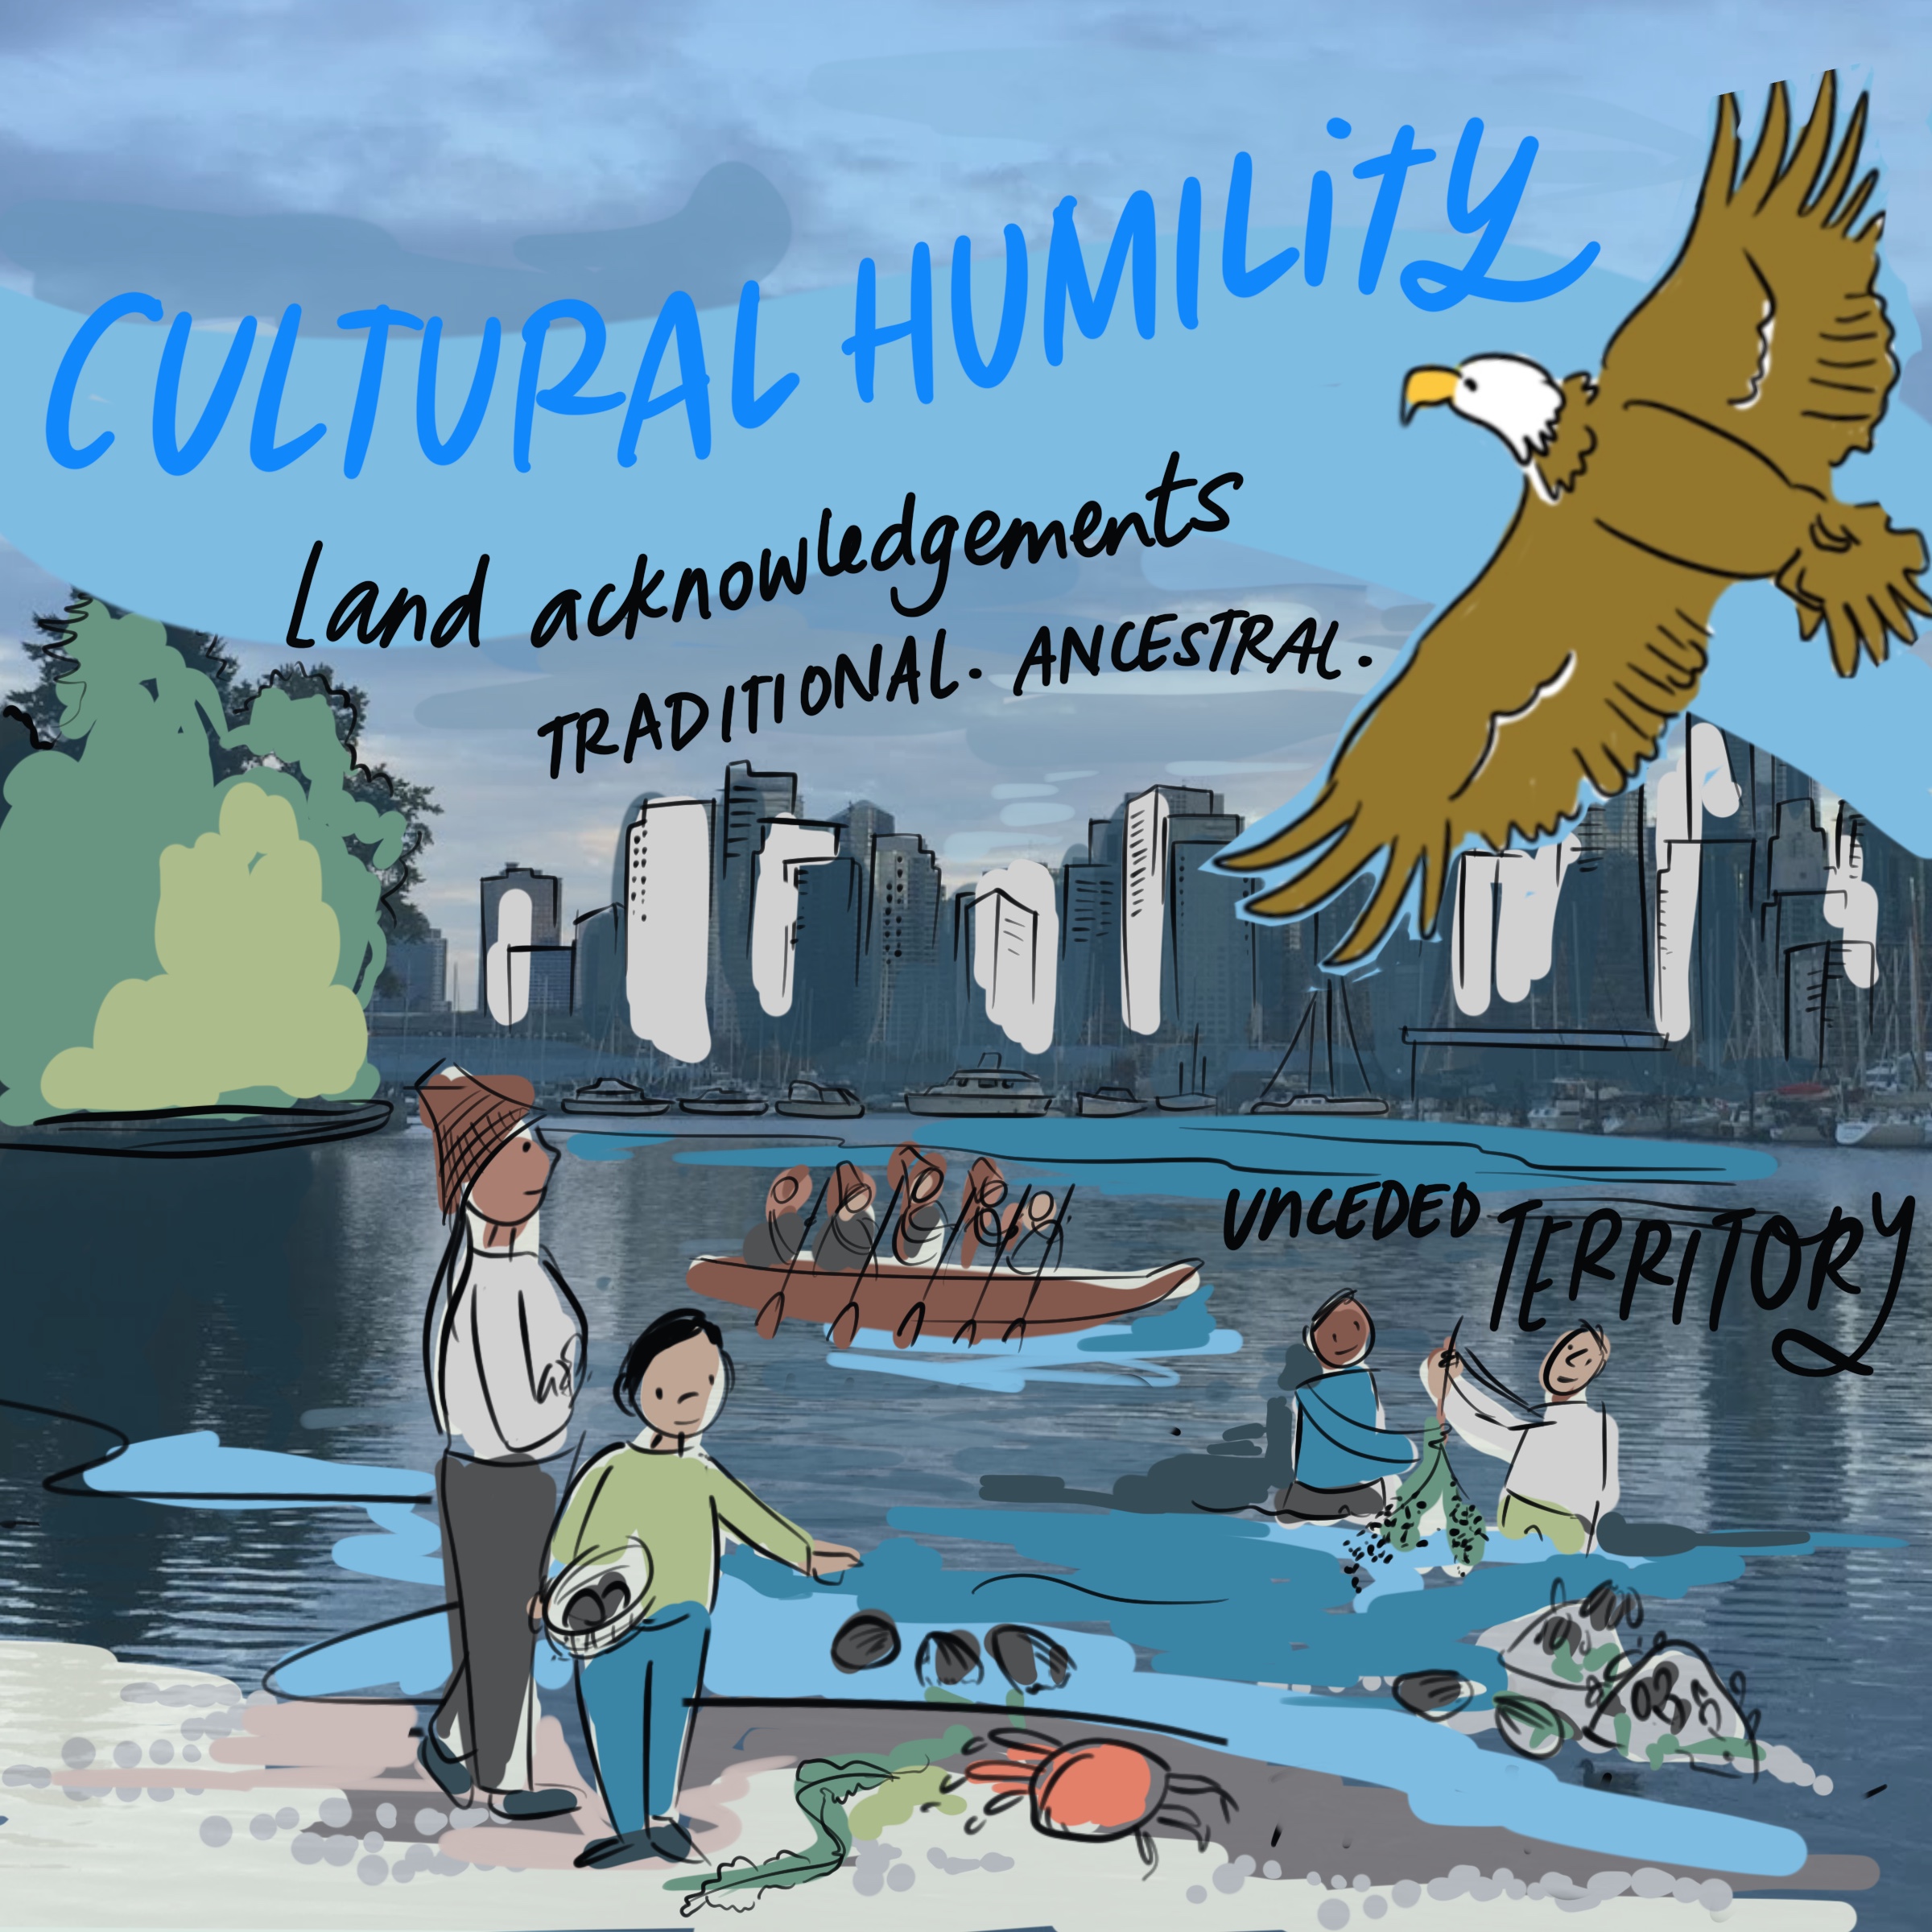 cultural humility, land acknowledgements, traditional, ancestral, unceded territory